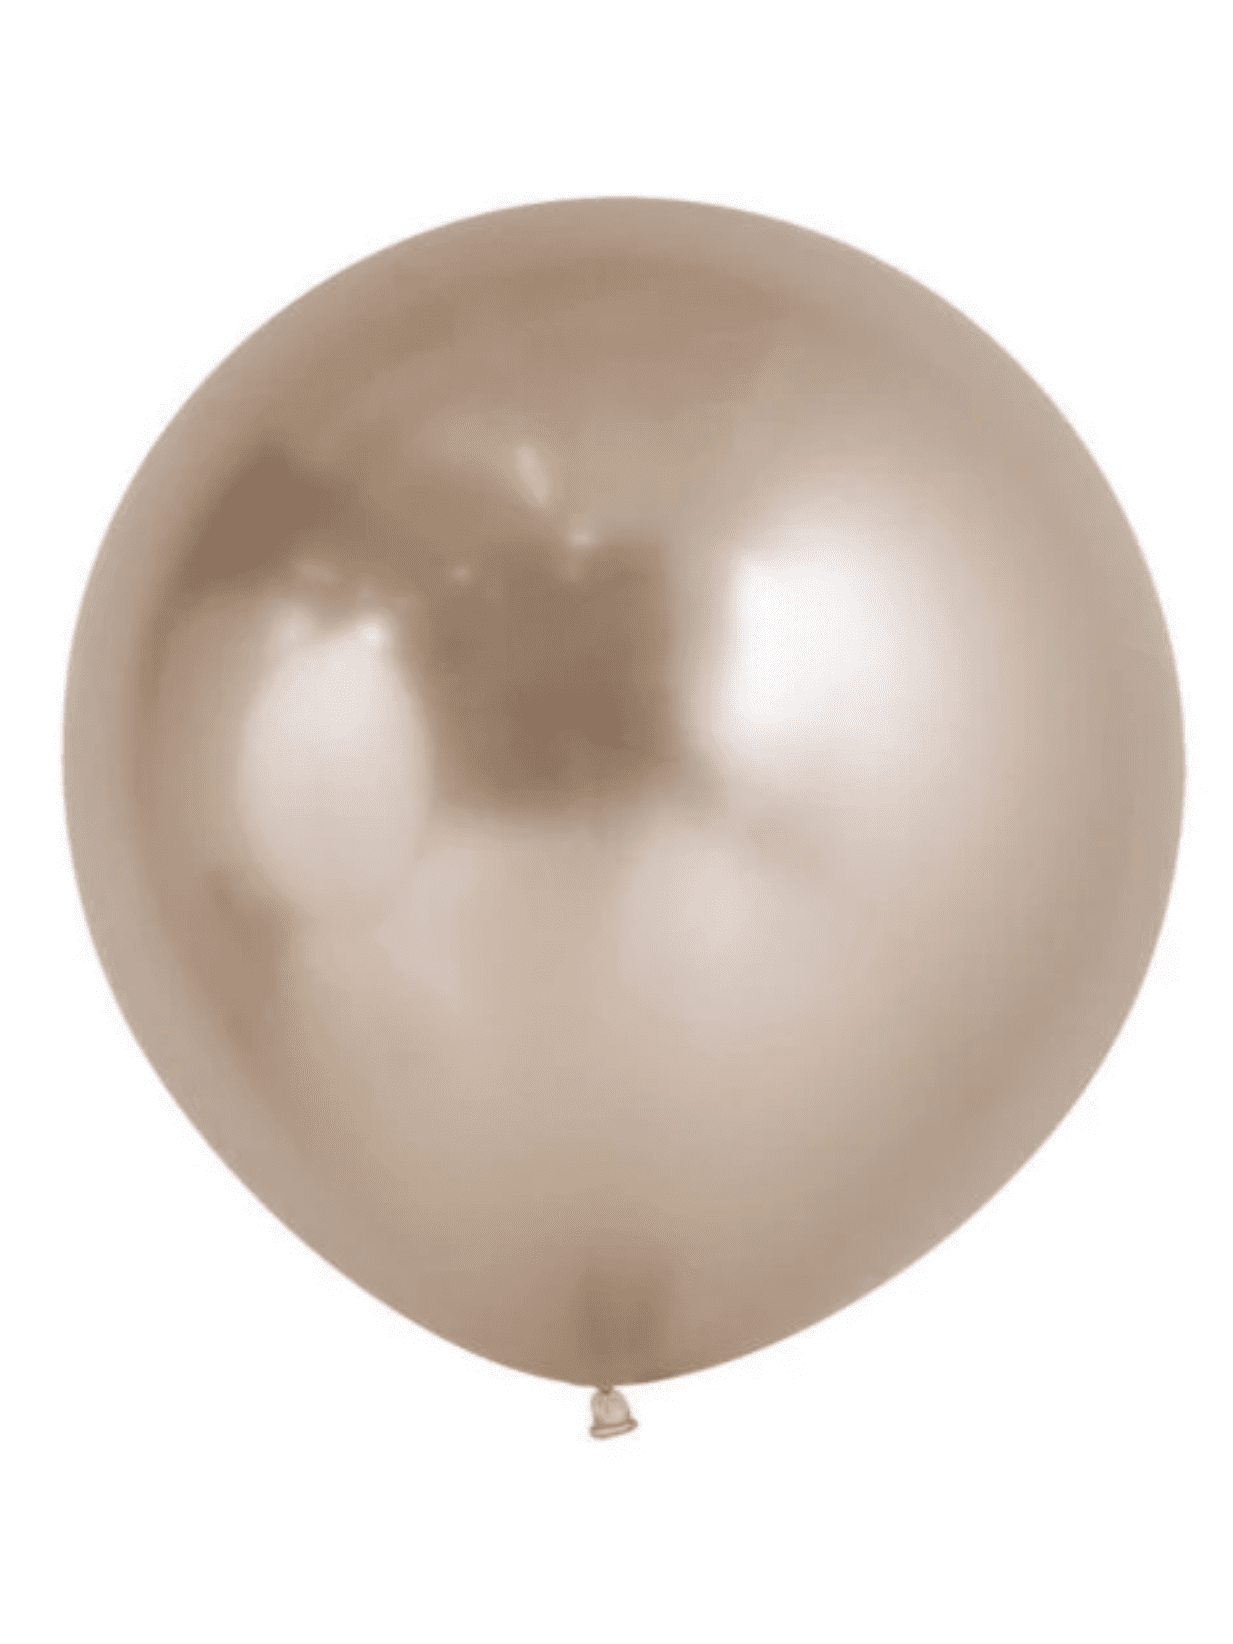 Champagne Gold BALLOON  in Sizes - small, regular or large